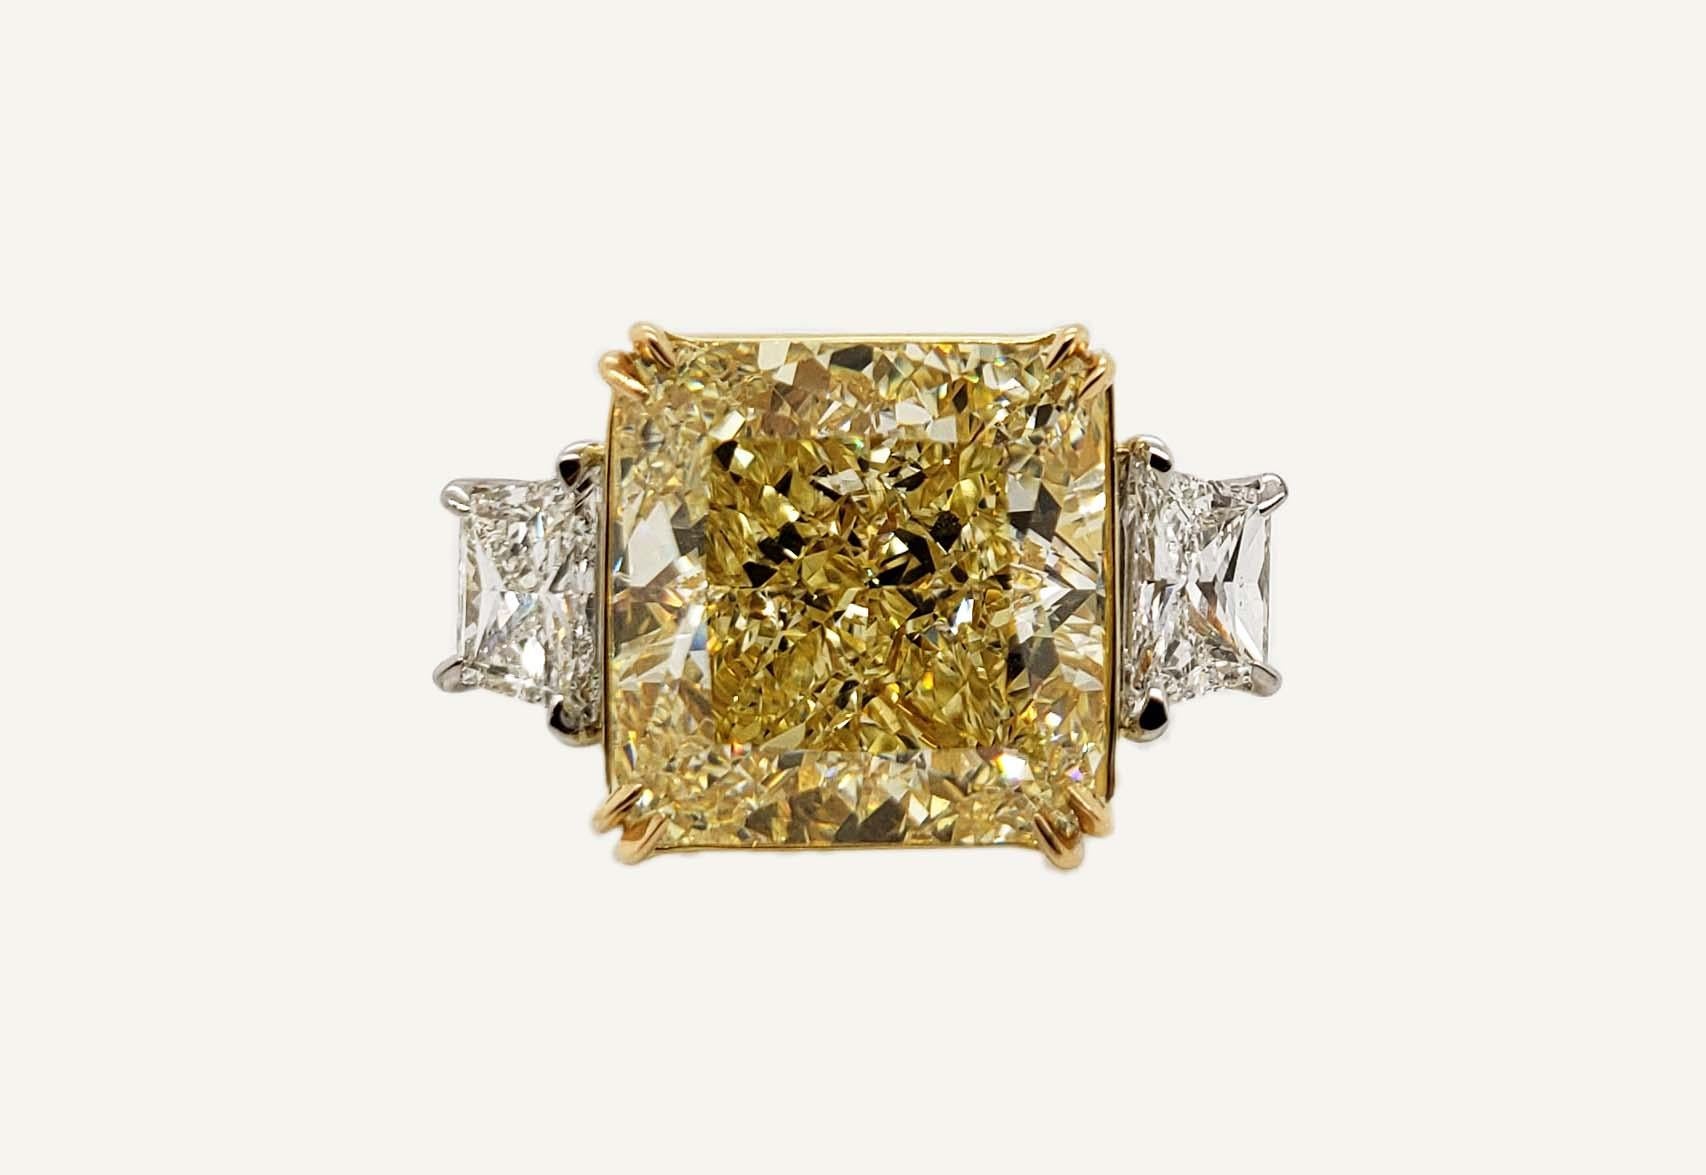 Scarselli 11 Carat Fancy Yellow Radiant Diamond Ring in Platinum 'GIA' In New Condition For Sale In New York, NY